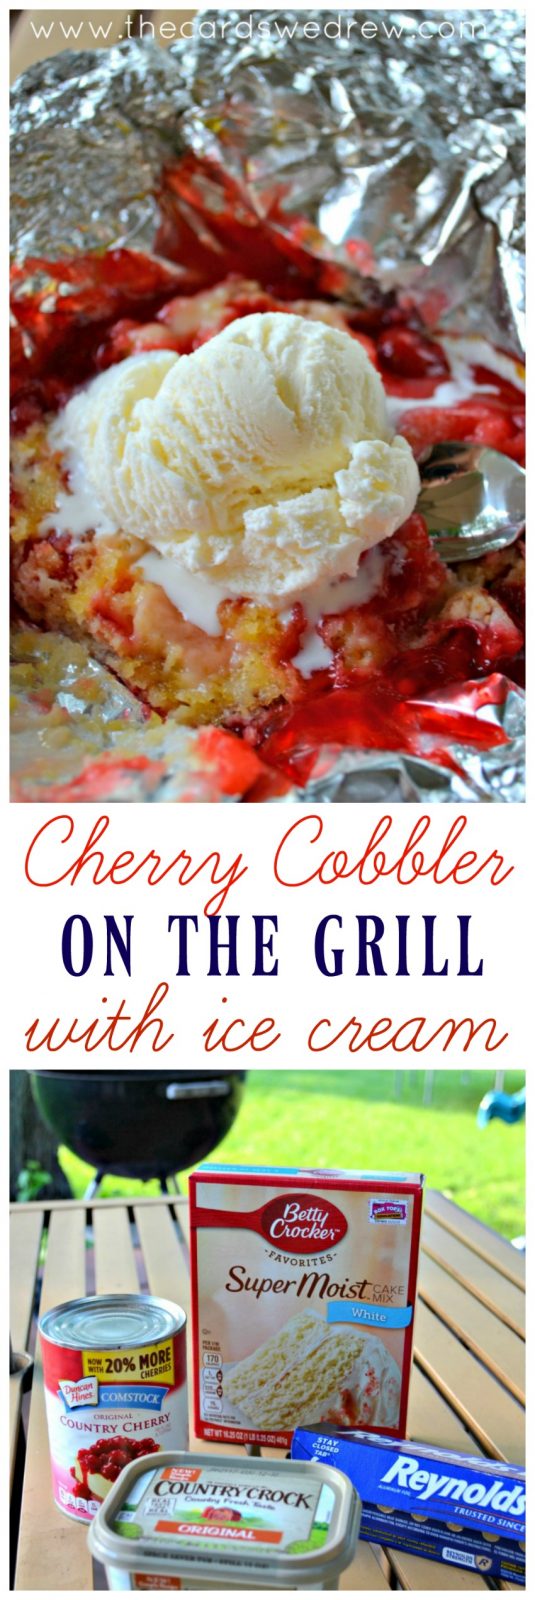 Cherry Cobbler on the Grill with Ice Cream Grilled Dessert